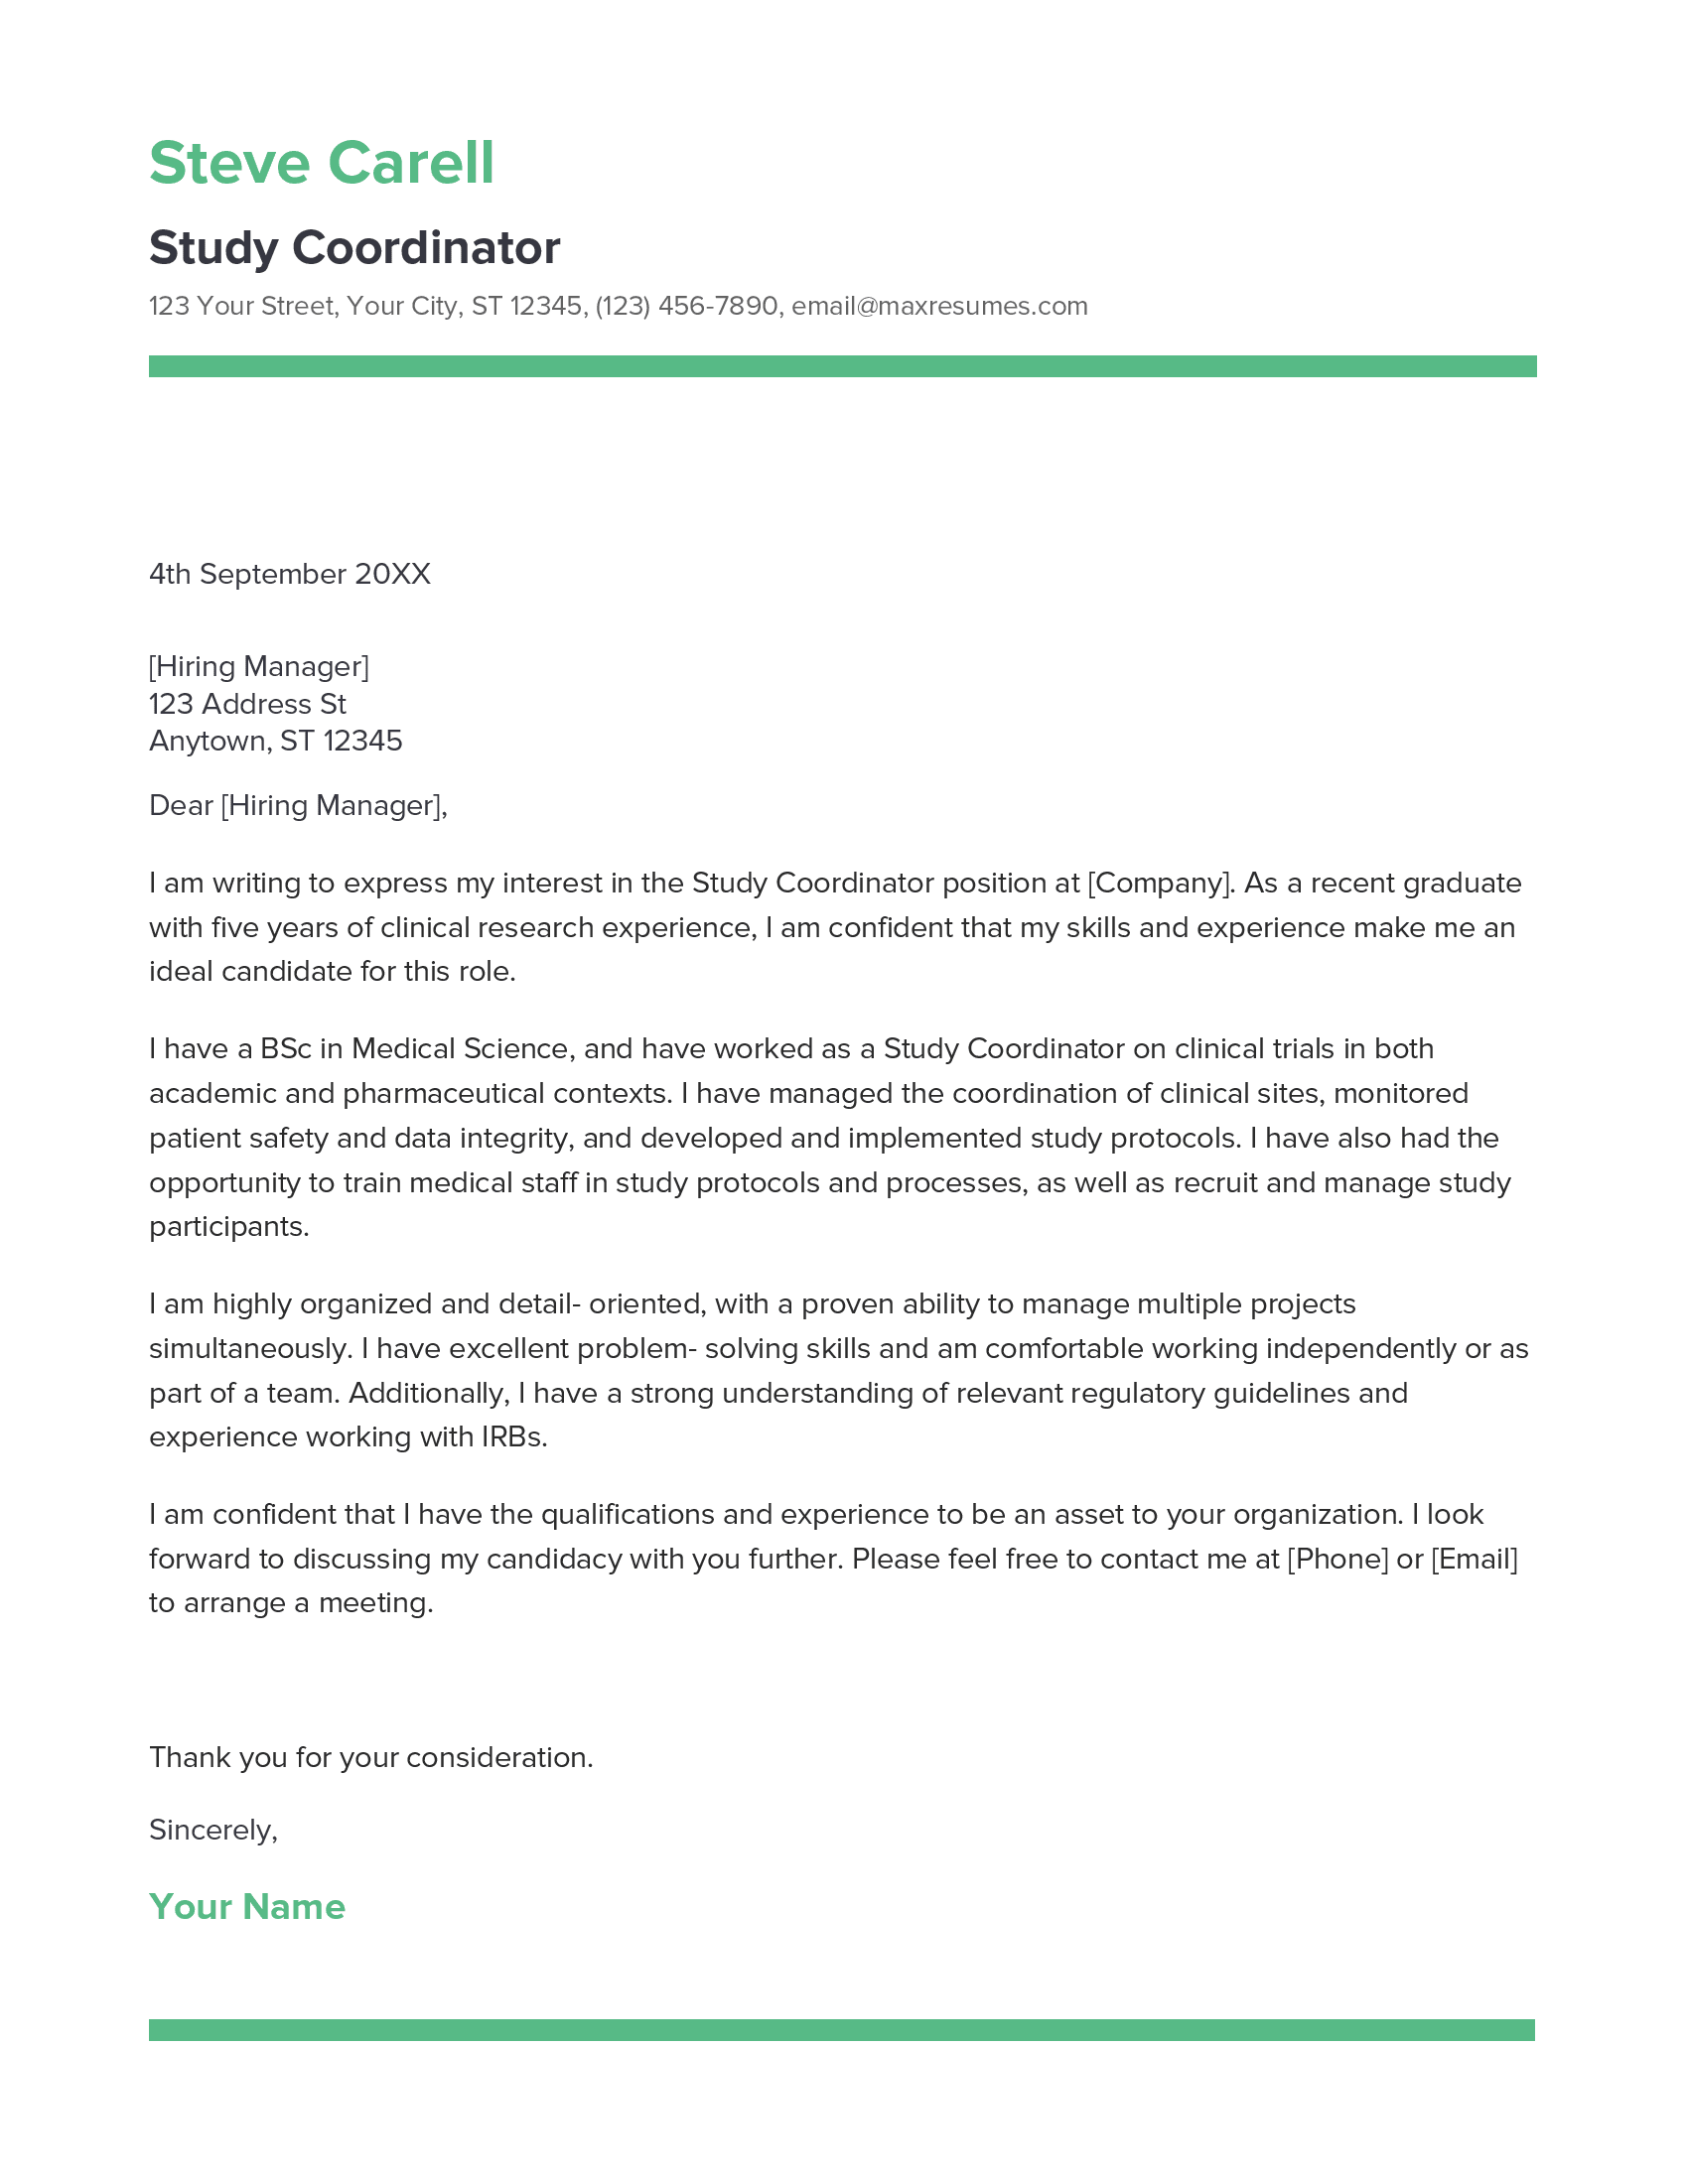 study coordinator cover letter